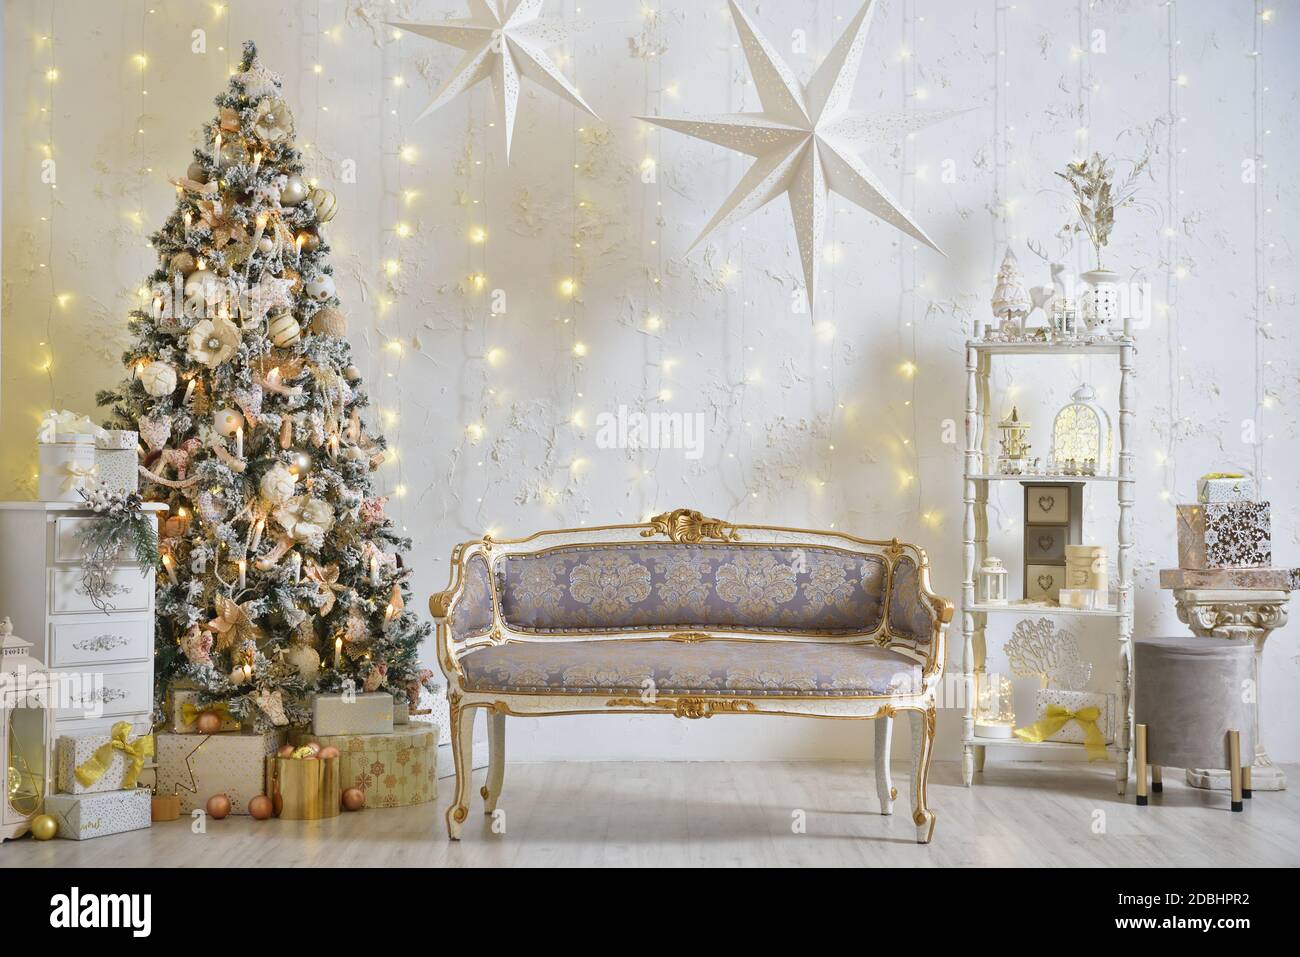 Stylish Christmas decorations in the living room with classic sofa, Christmas tree and garlands on the wall Stock Photo